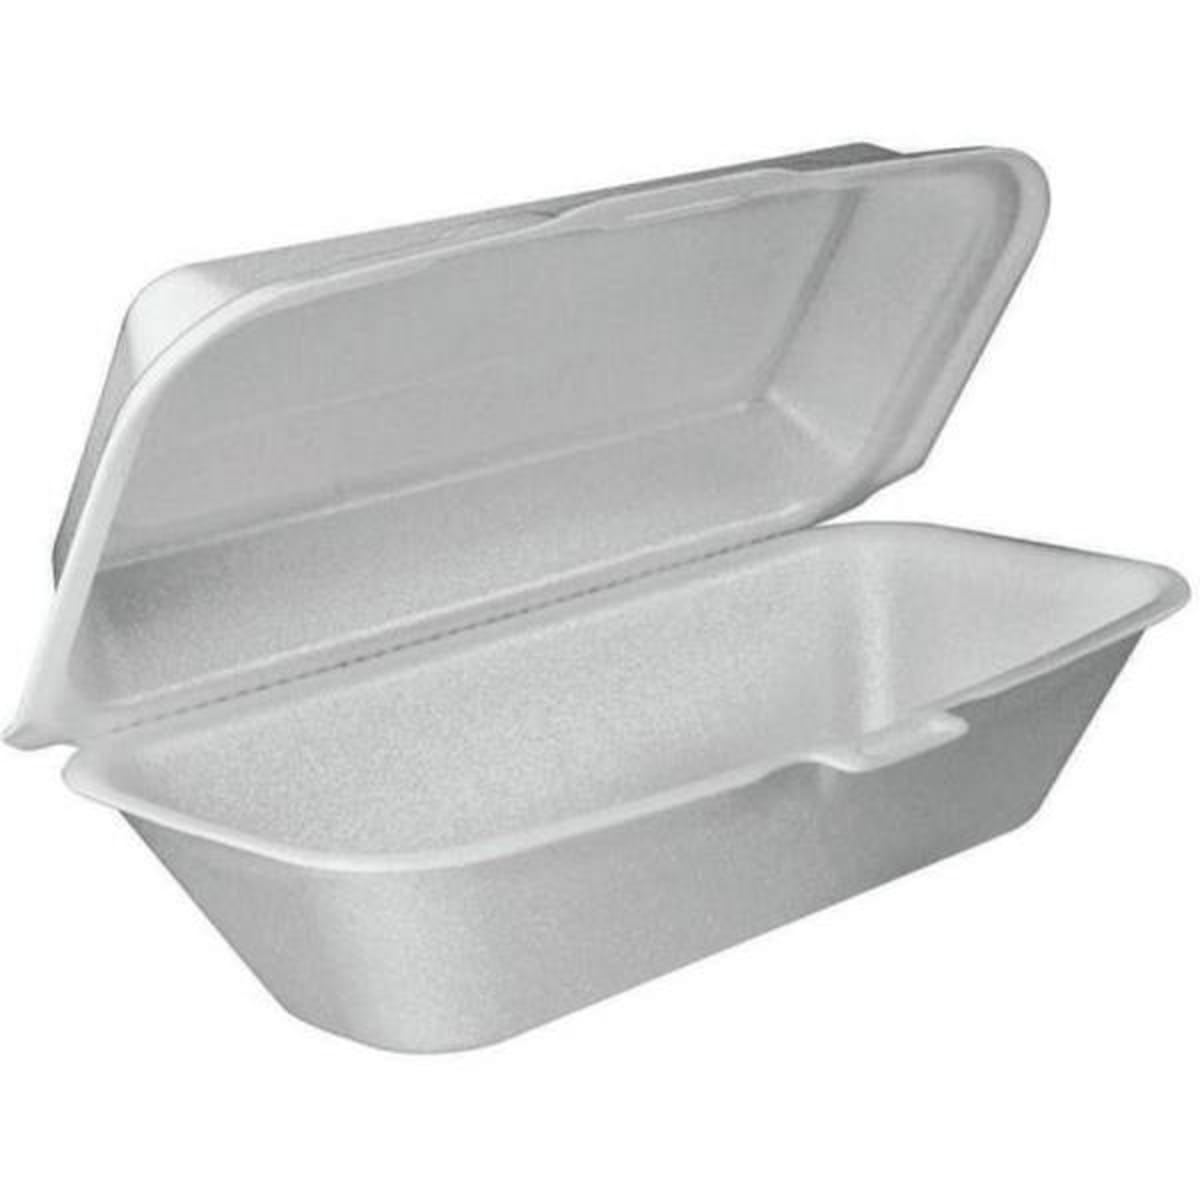 Dart 16MJ32, 16-Ounce White Foam Food Container, 500-Piece Case